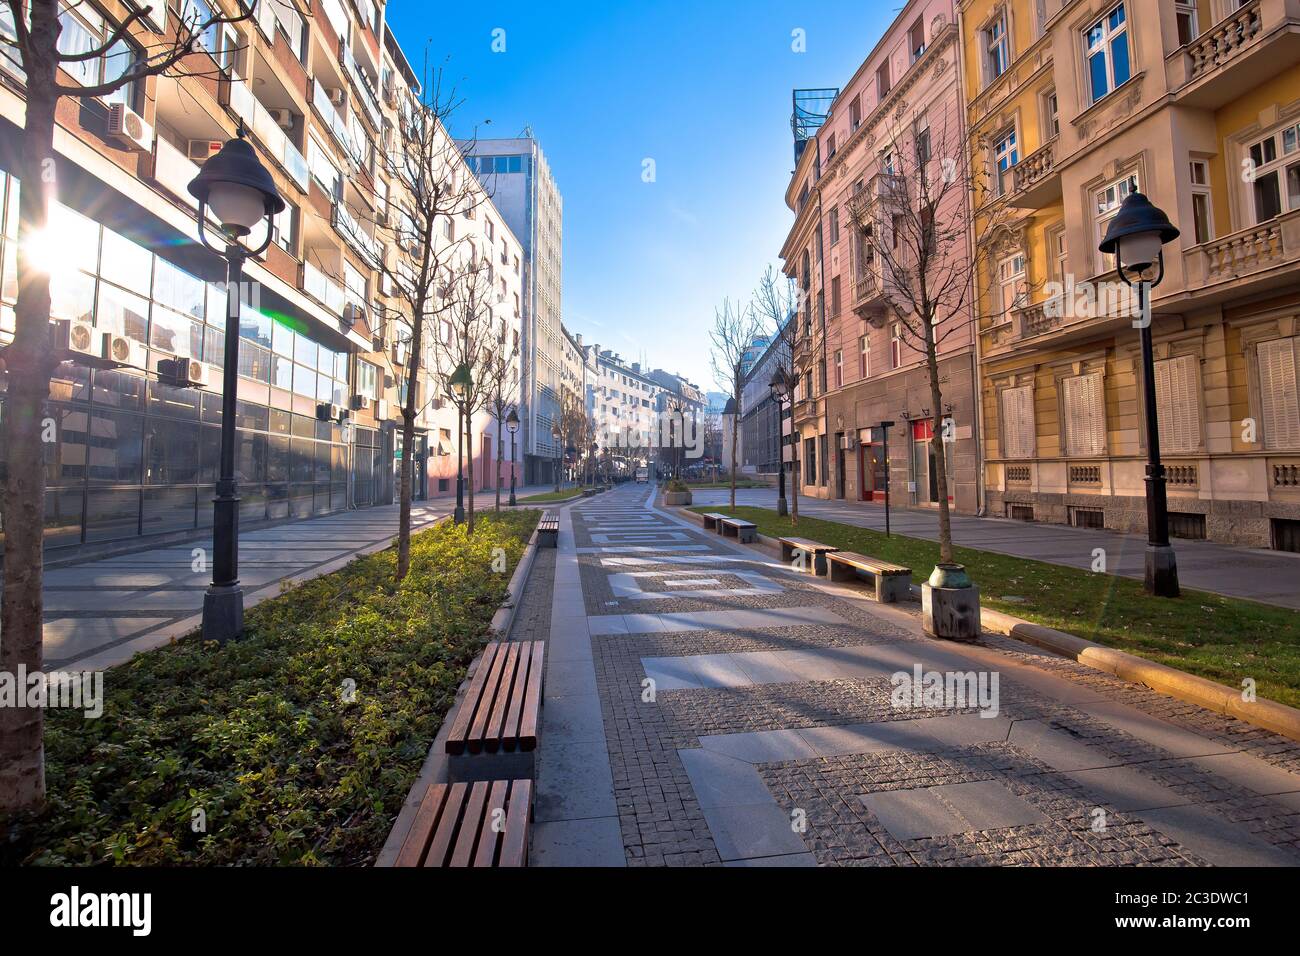 Belgrade. Cobbled streets in historic Beograd city enter view Stock Photo